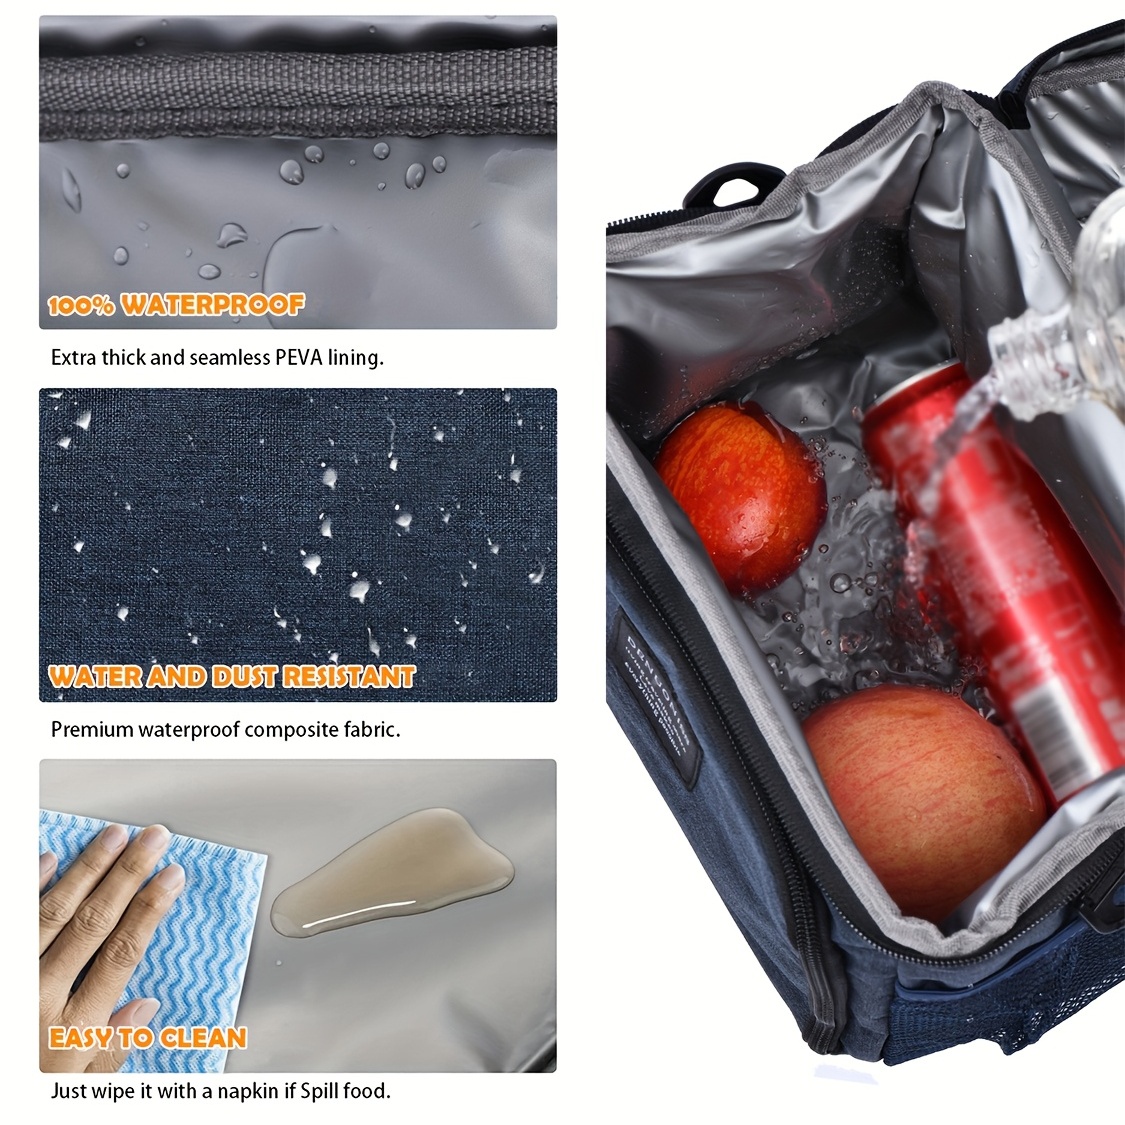 For 6-8 Hours Leakproof Insulated Thermal Cooler Bag,Lunch Bag